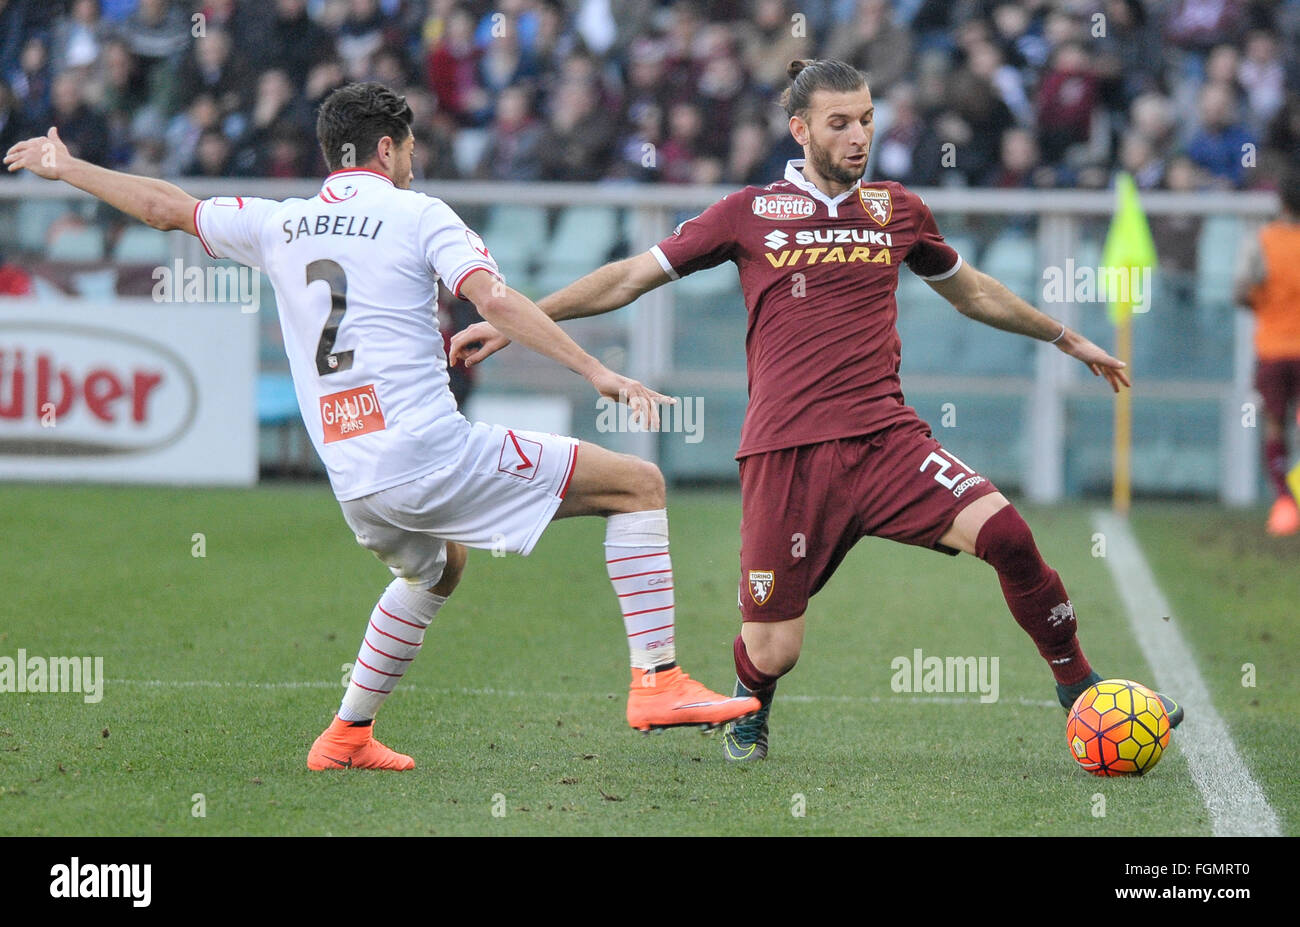 Turin, Italy. 21st Feb, 2016. Stefano Sabelli (left) and Gaston Silva (right) fight for the ball during the Serie A football match between Torino FC and Carpi FC. The final result of the match is 0-0 © Nicolò Campo/Pacific Press/Alamy Live News Stock Photo